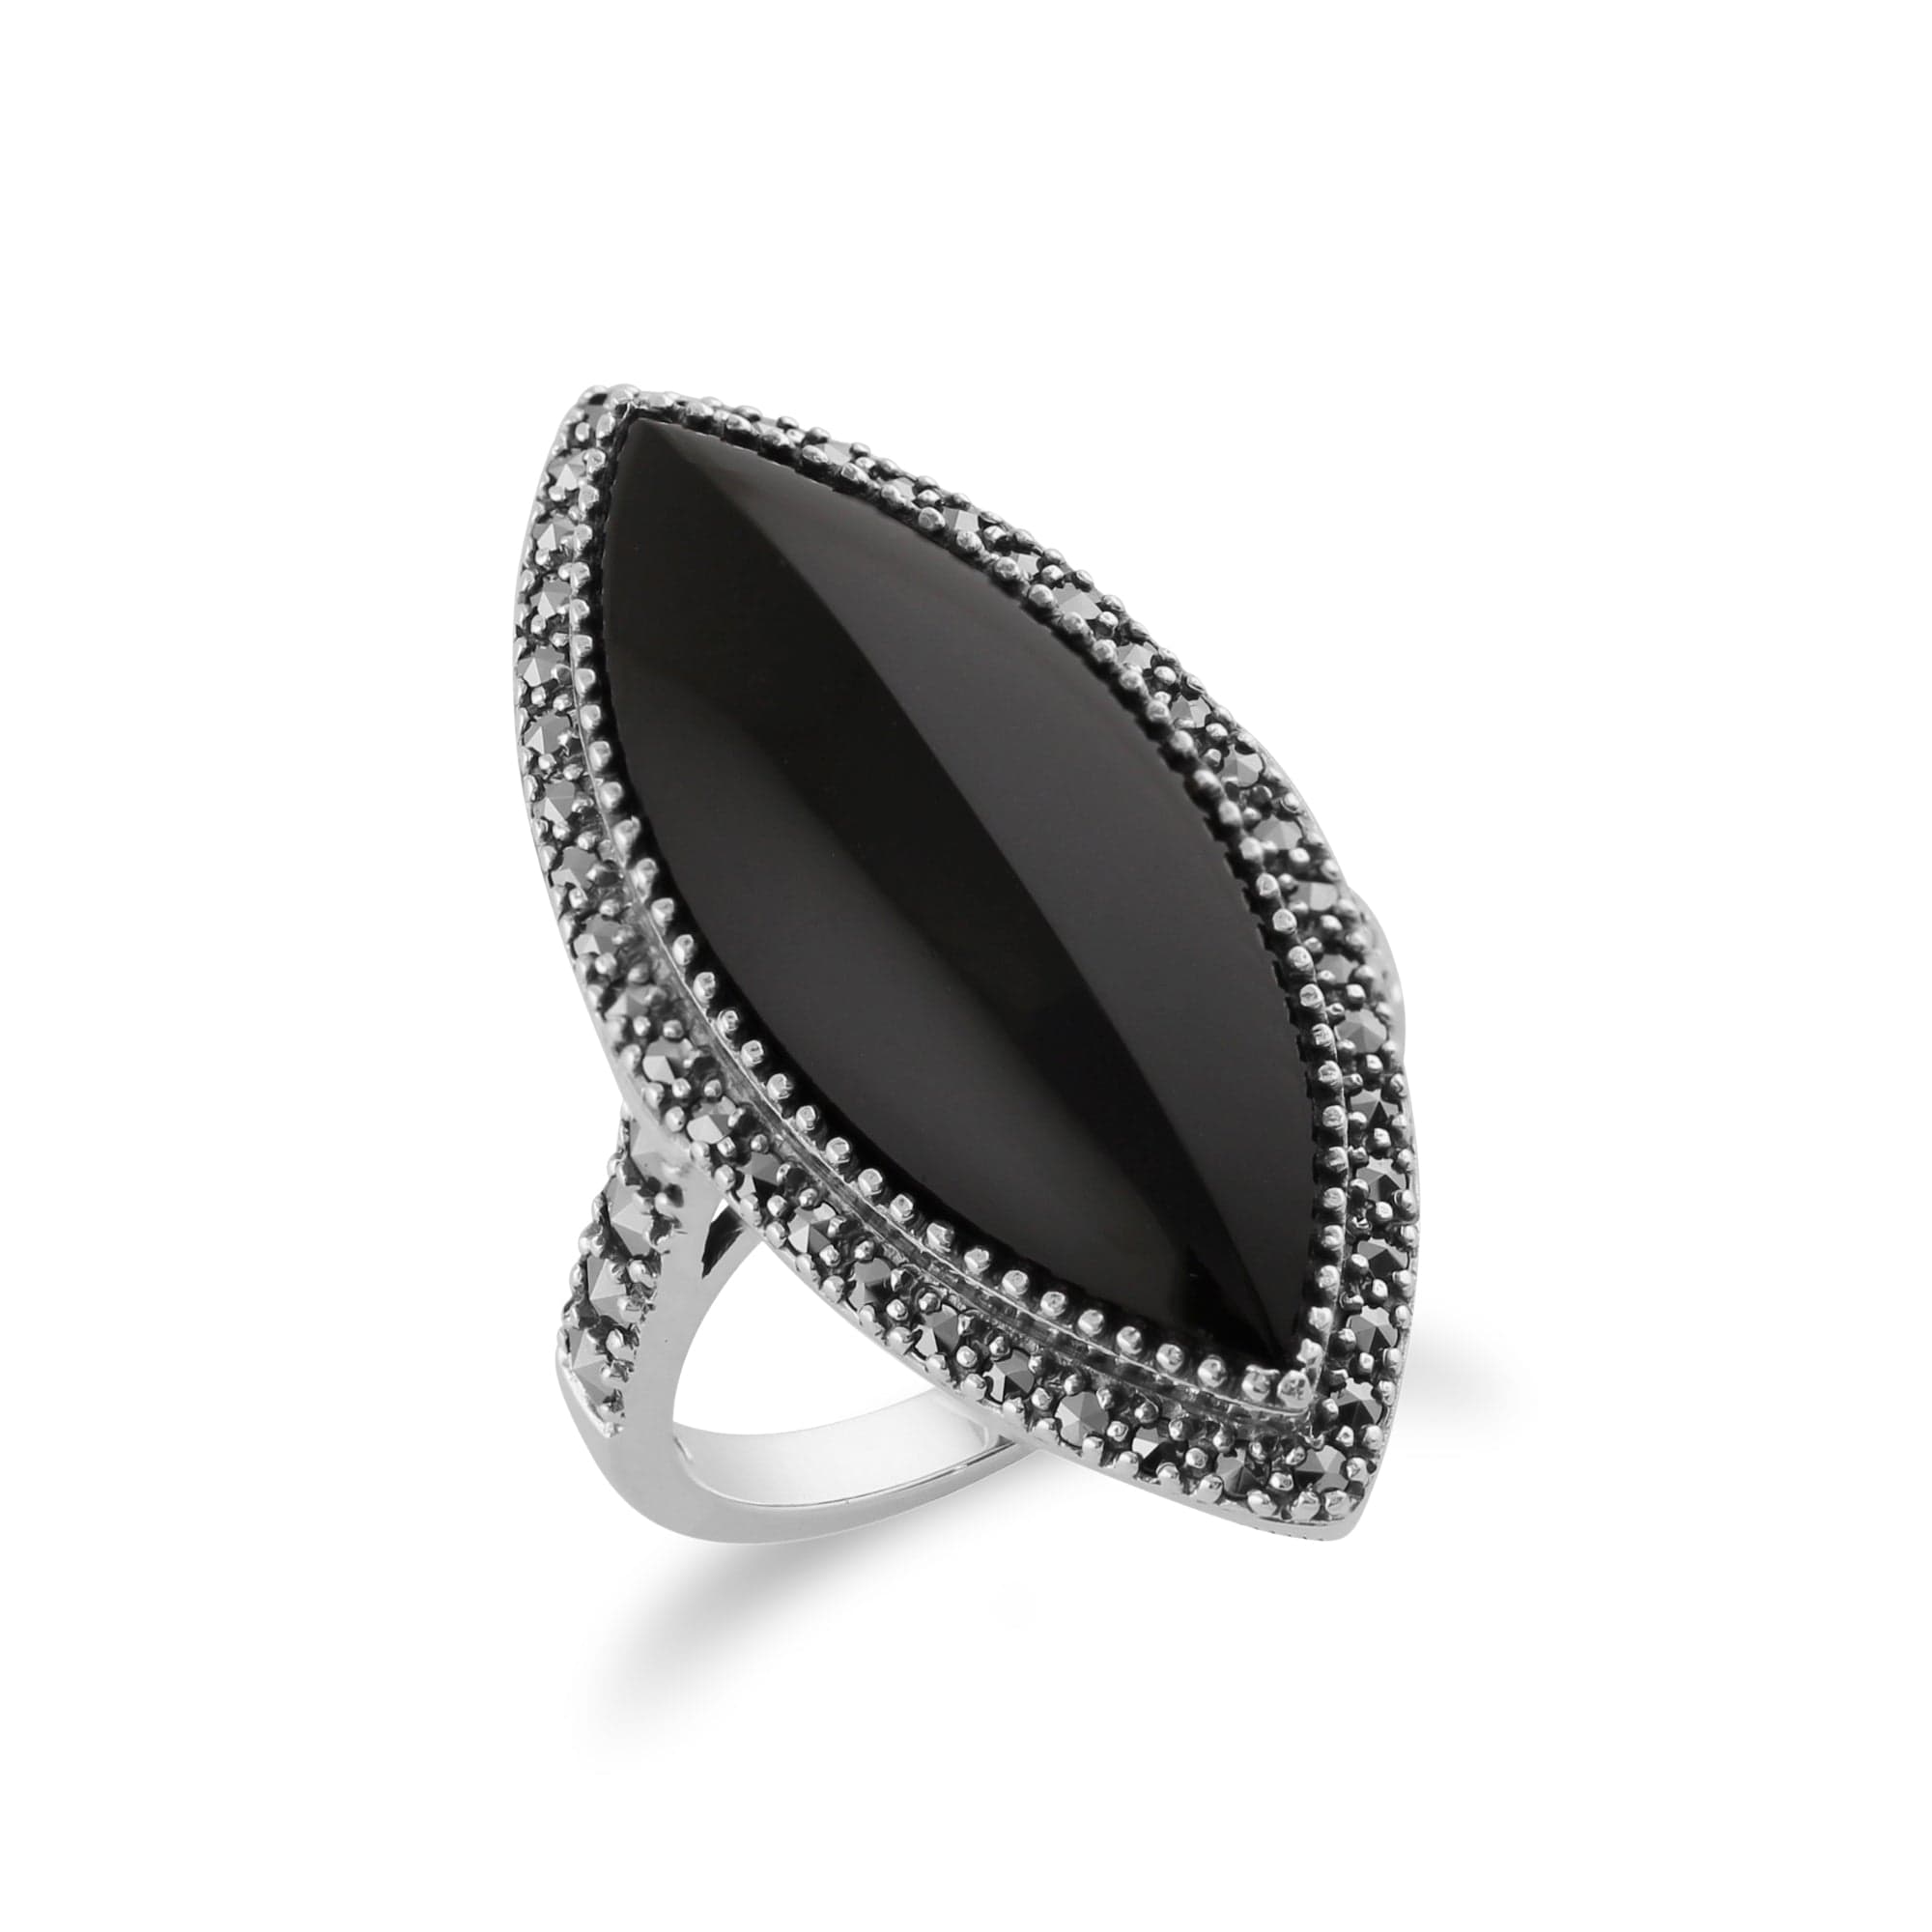 Art Deco Style Marquise Black Onyx & Marcasite Statement Ring in 925 Sterling Silver